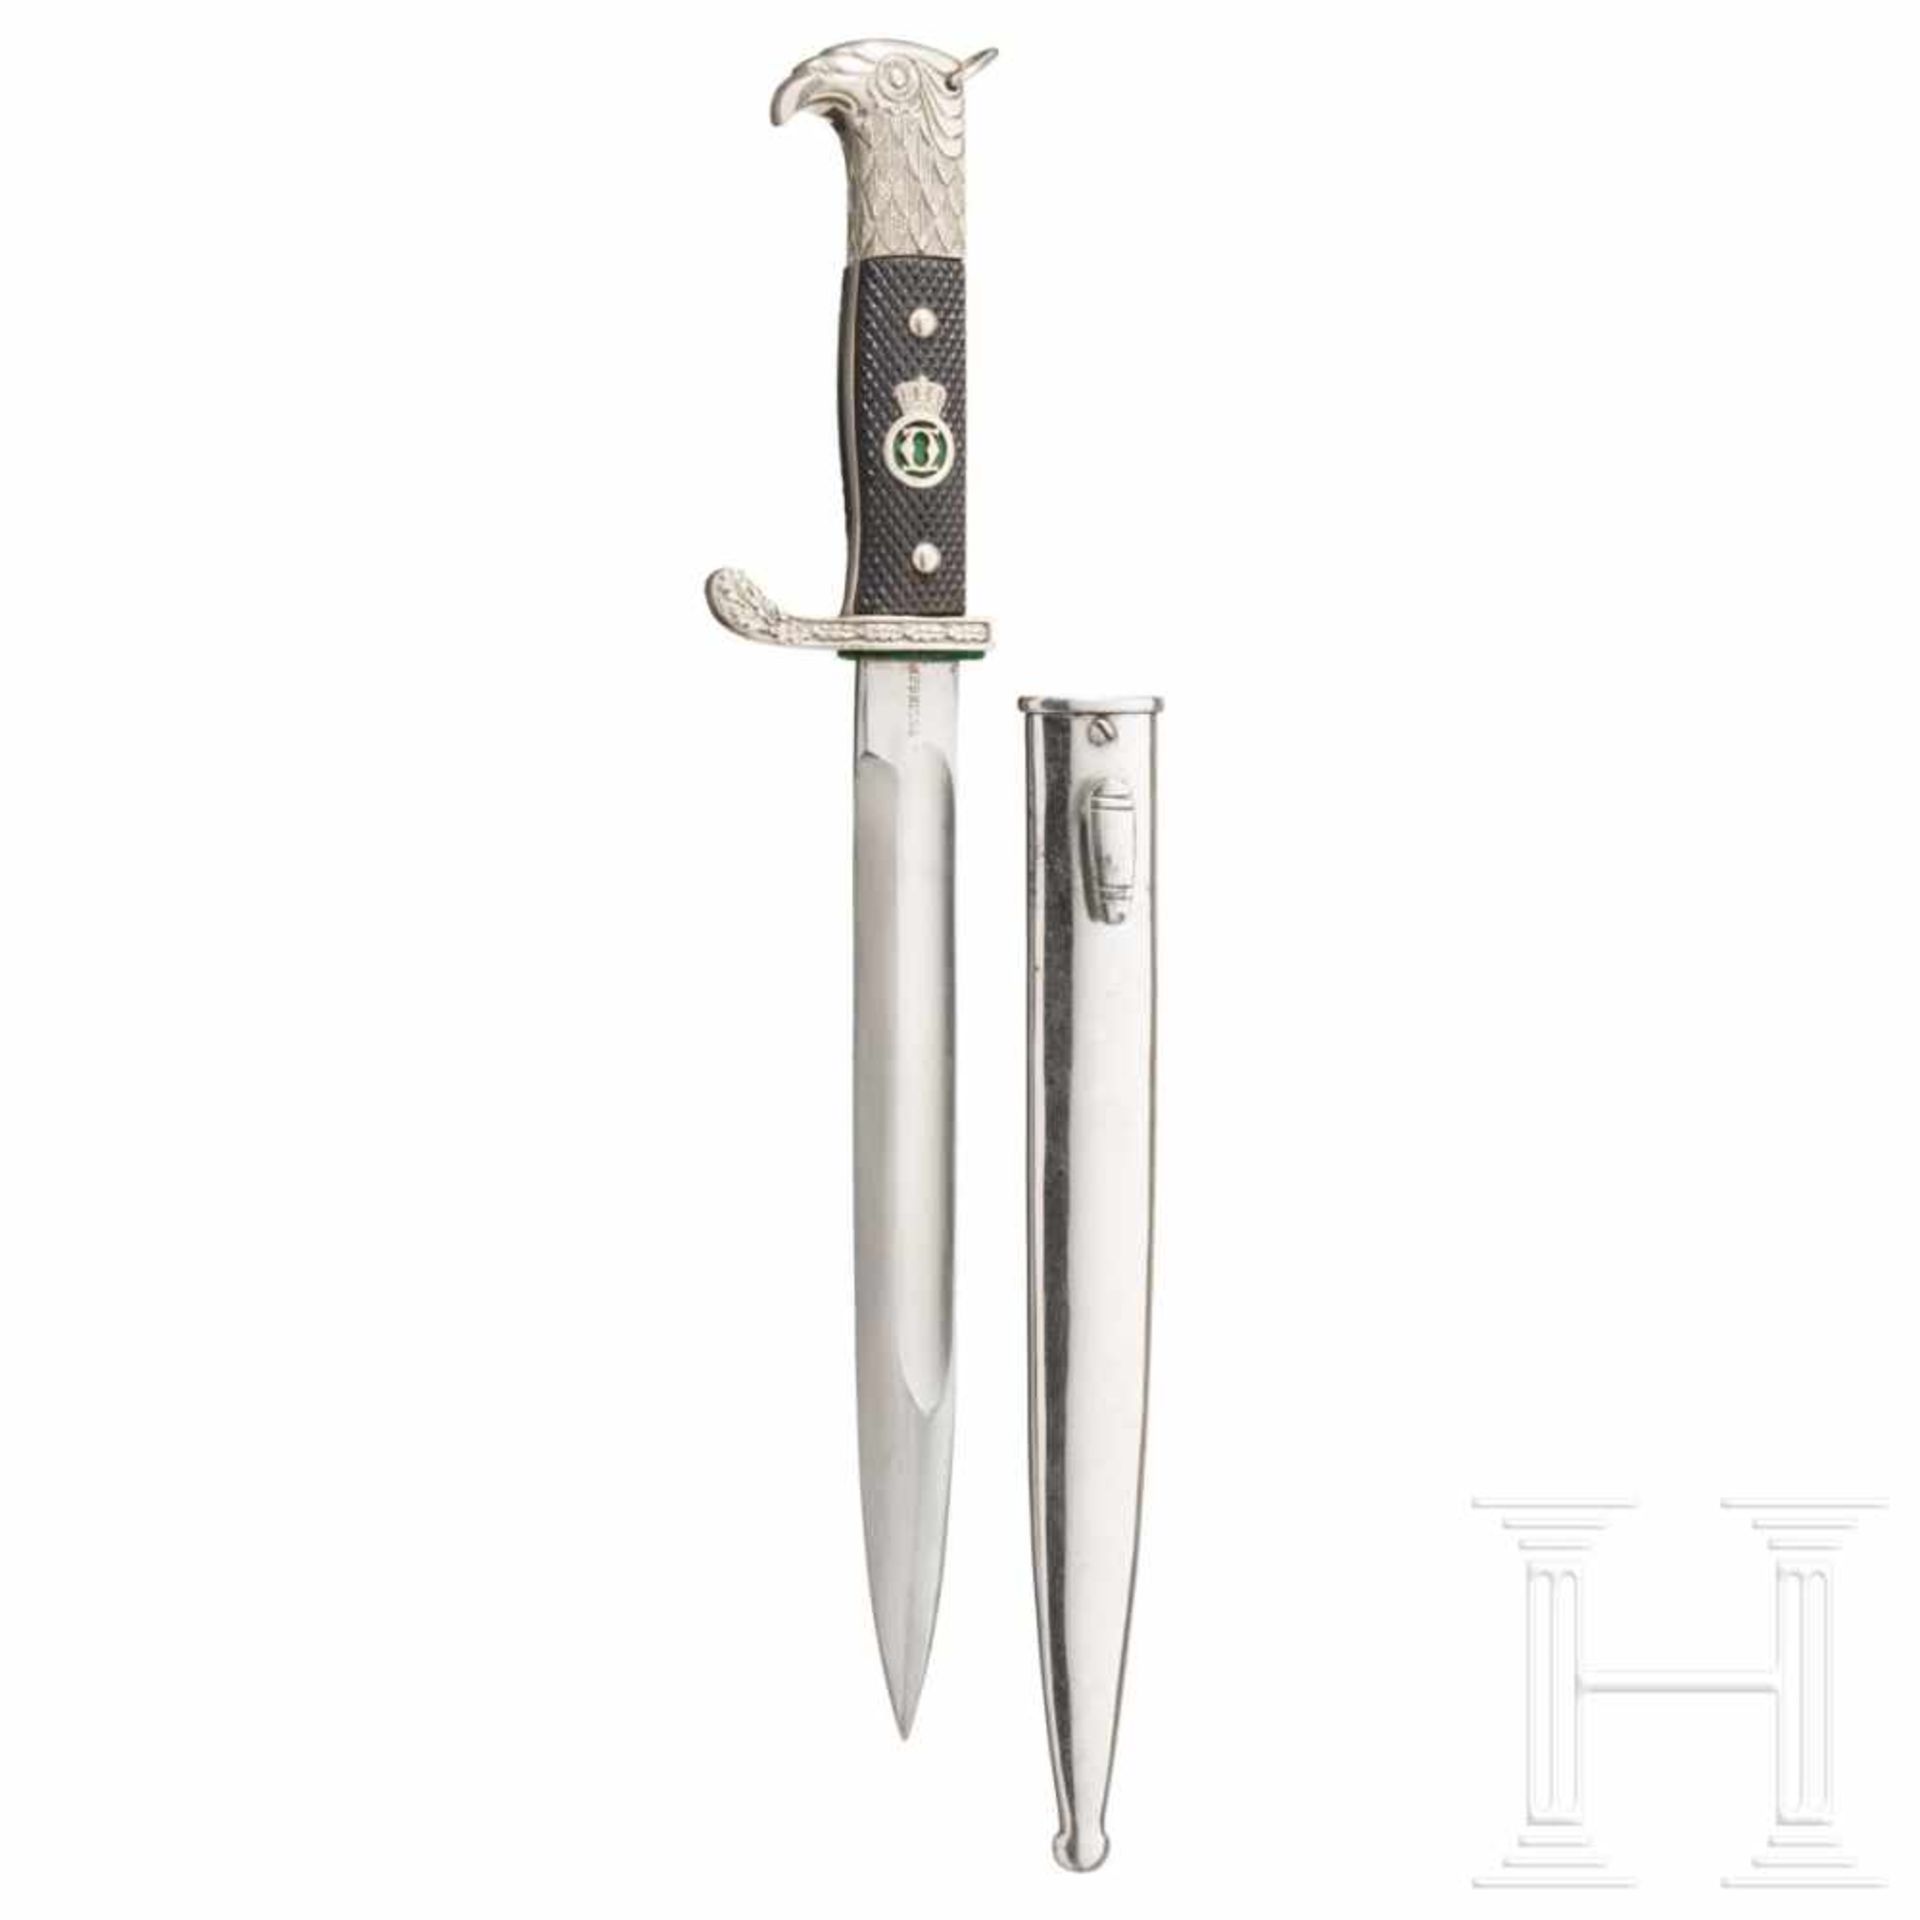 A rare dagger M 1930 for NCOs of the Romanian army by Eickhorn, SolingenVernickelte Rückenklinge mit